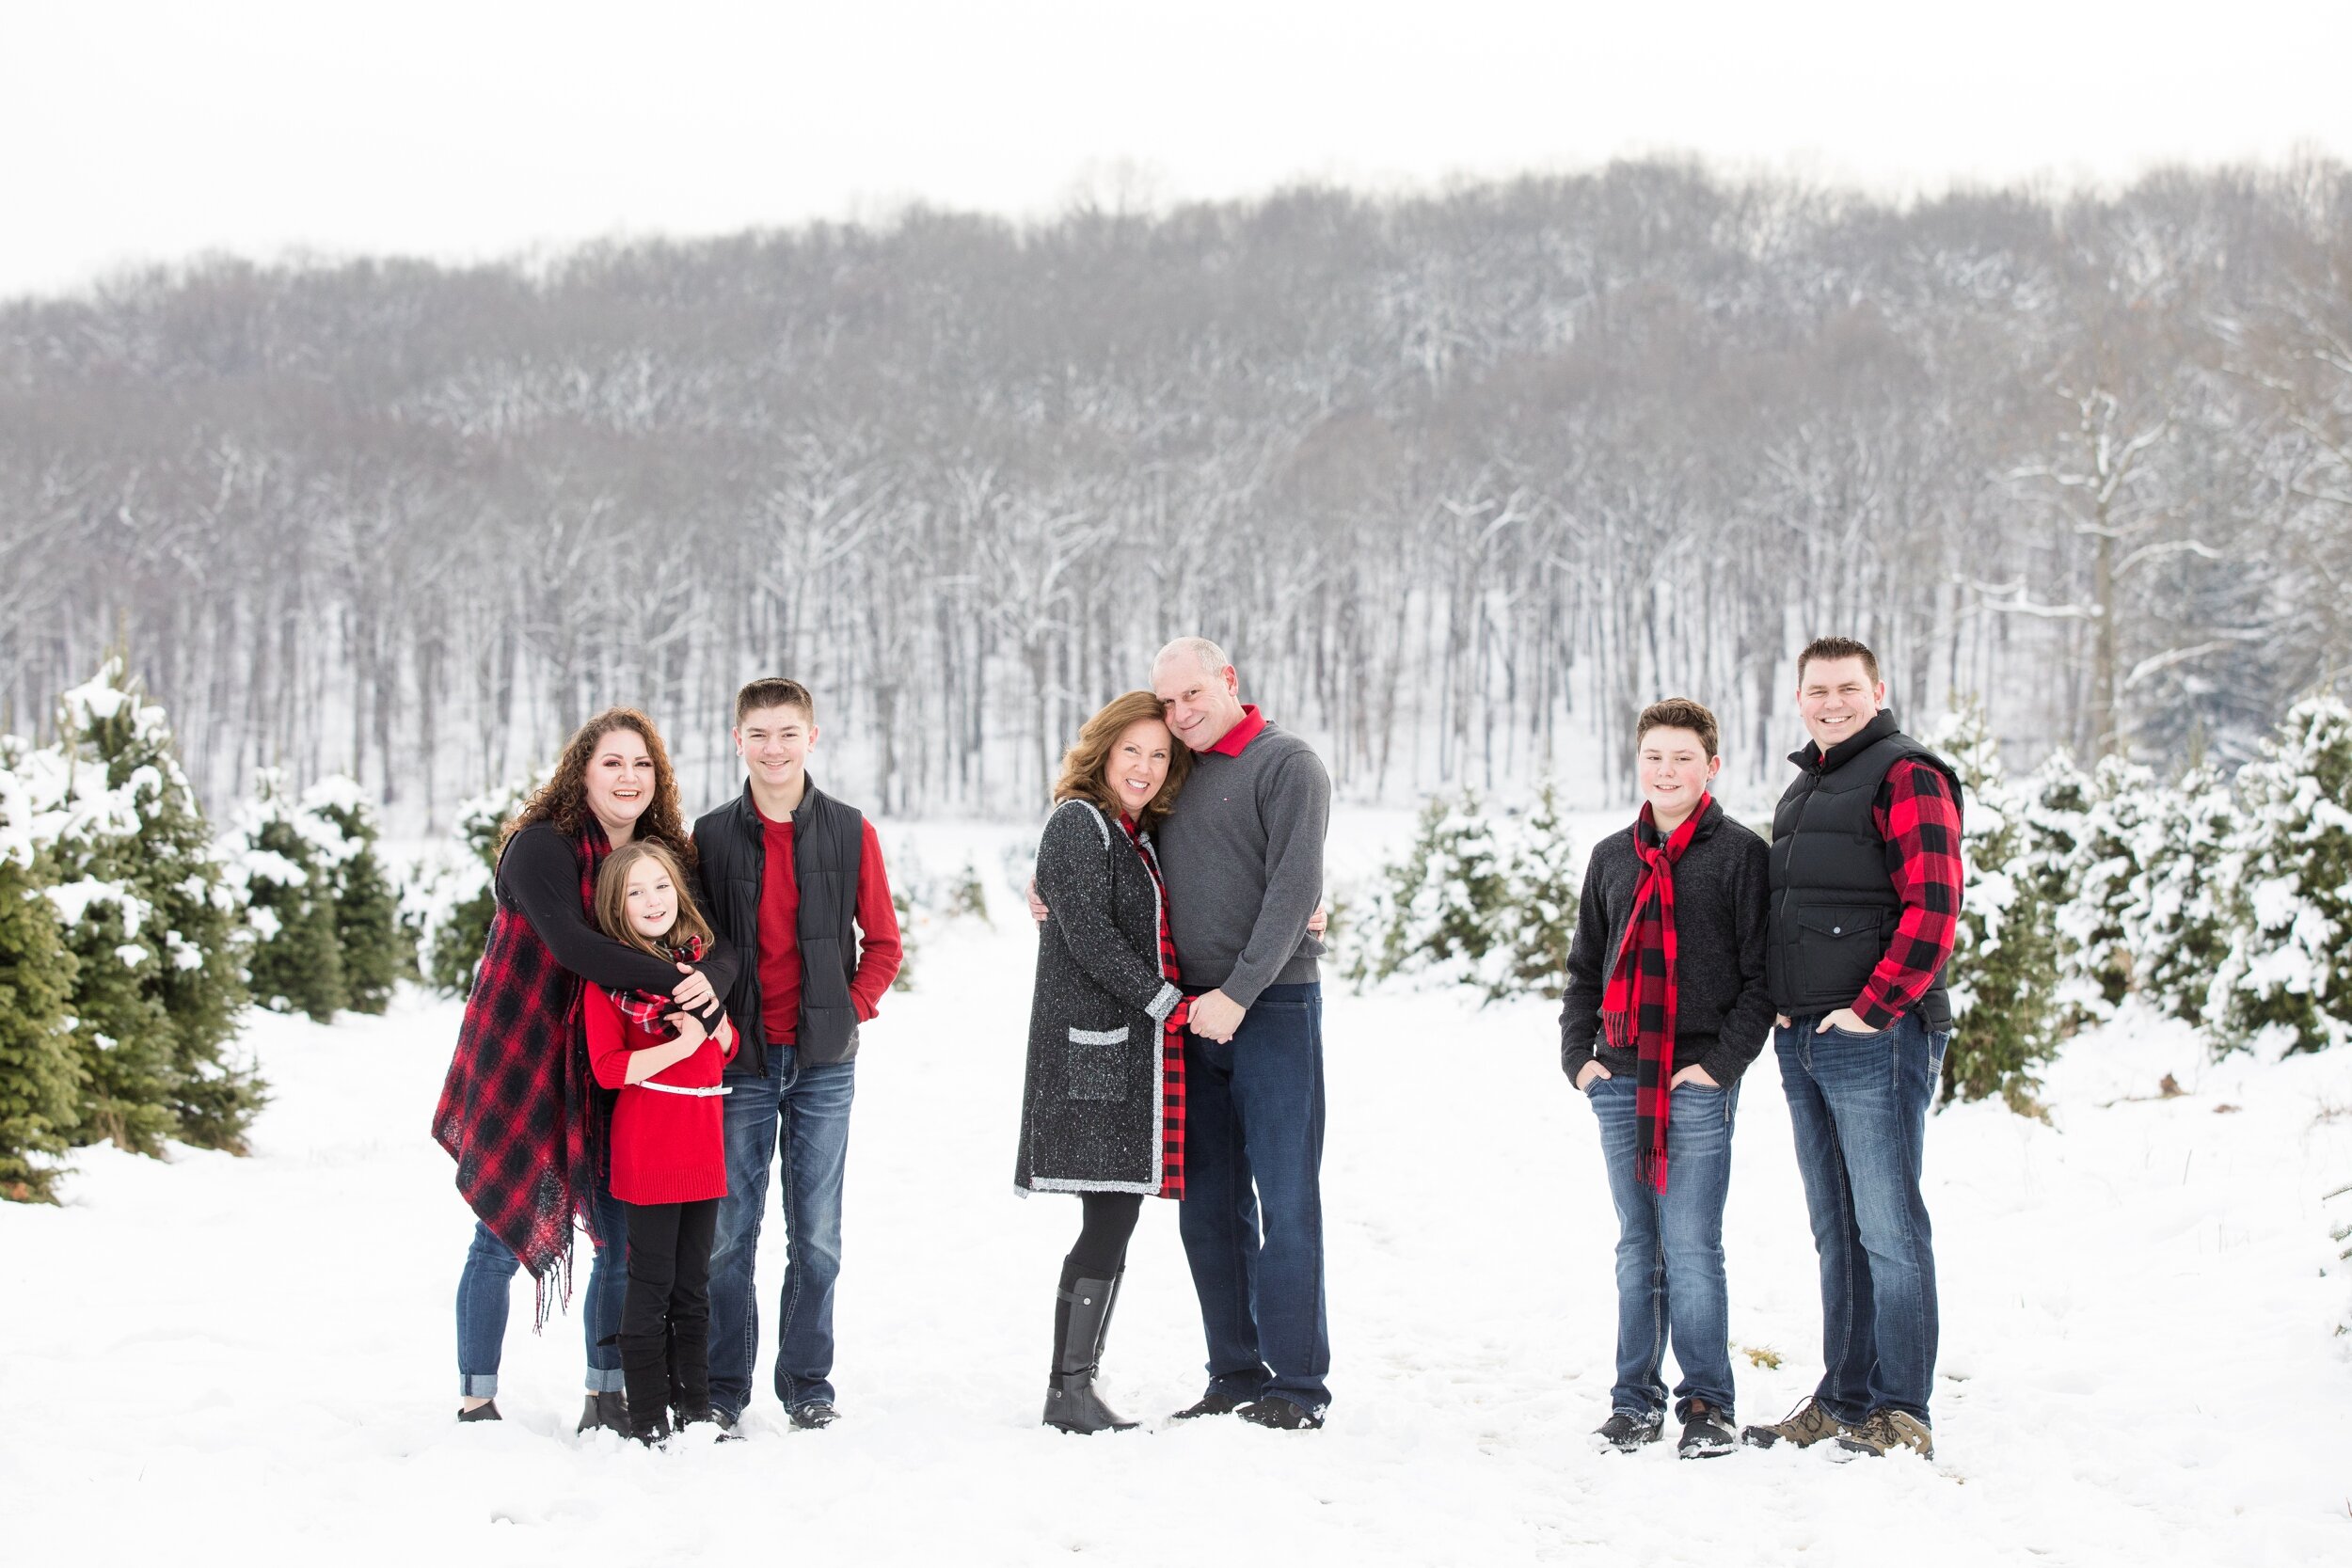 location ideas for photo sessions near cranberry township and zelienople, cranberry township photographer, zelienople photographer, north pittsburgh photographer, lake forest gardens pictures